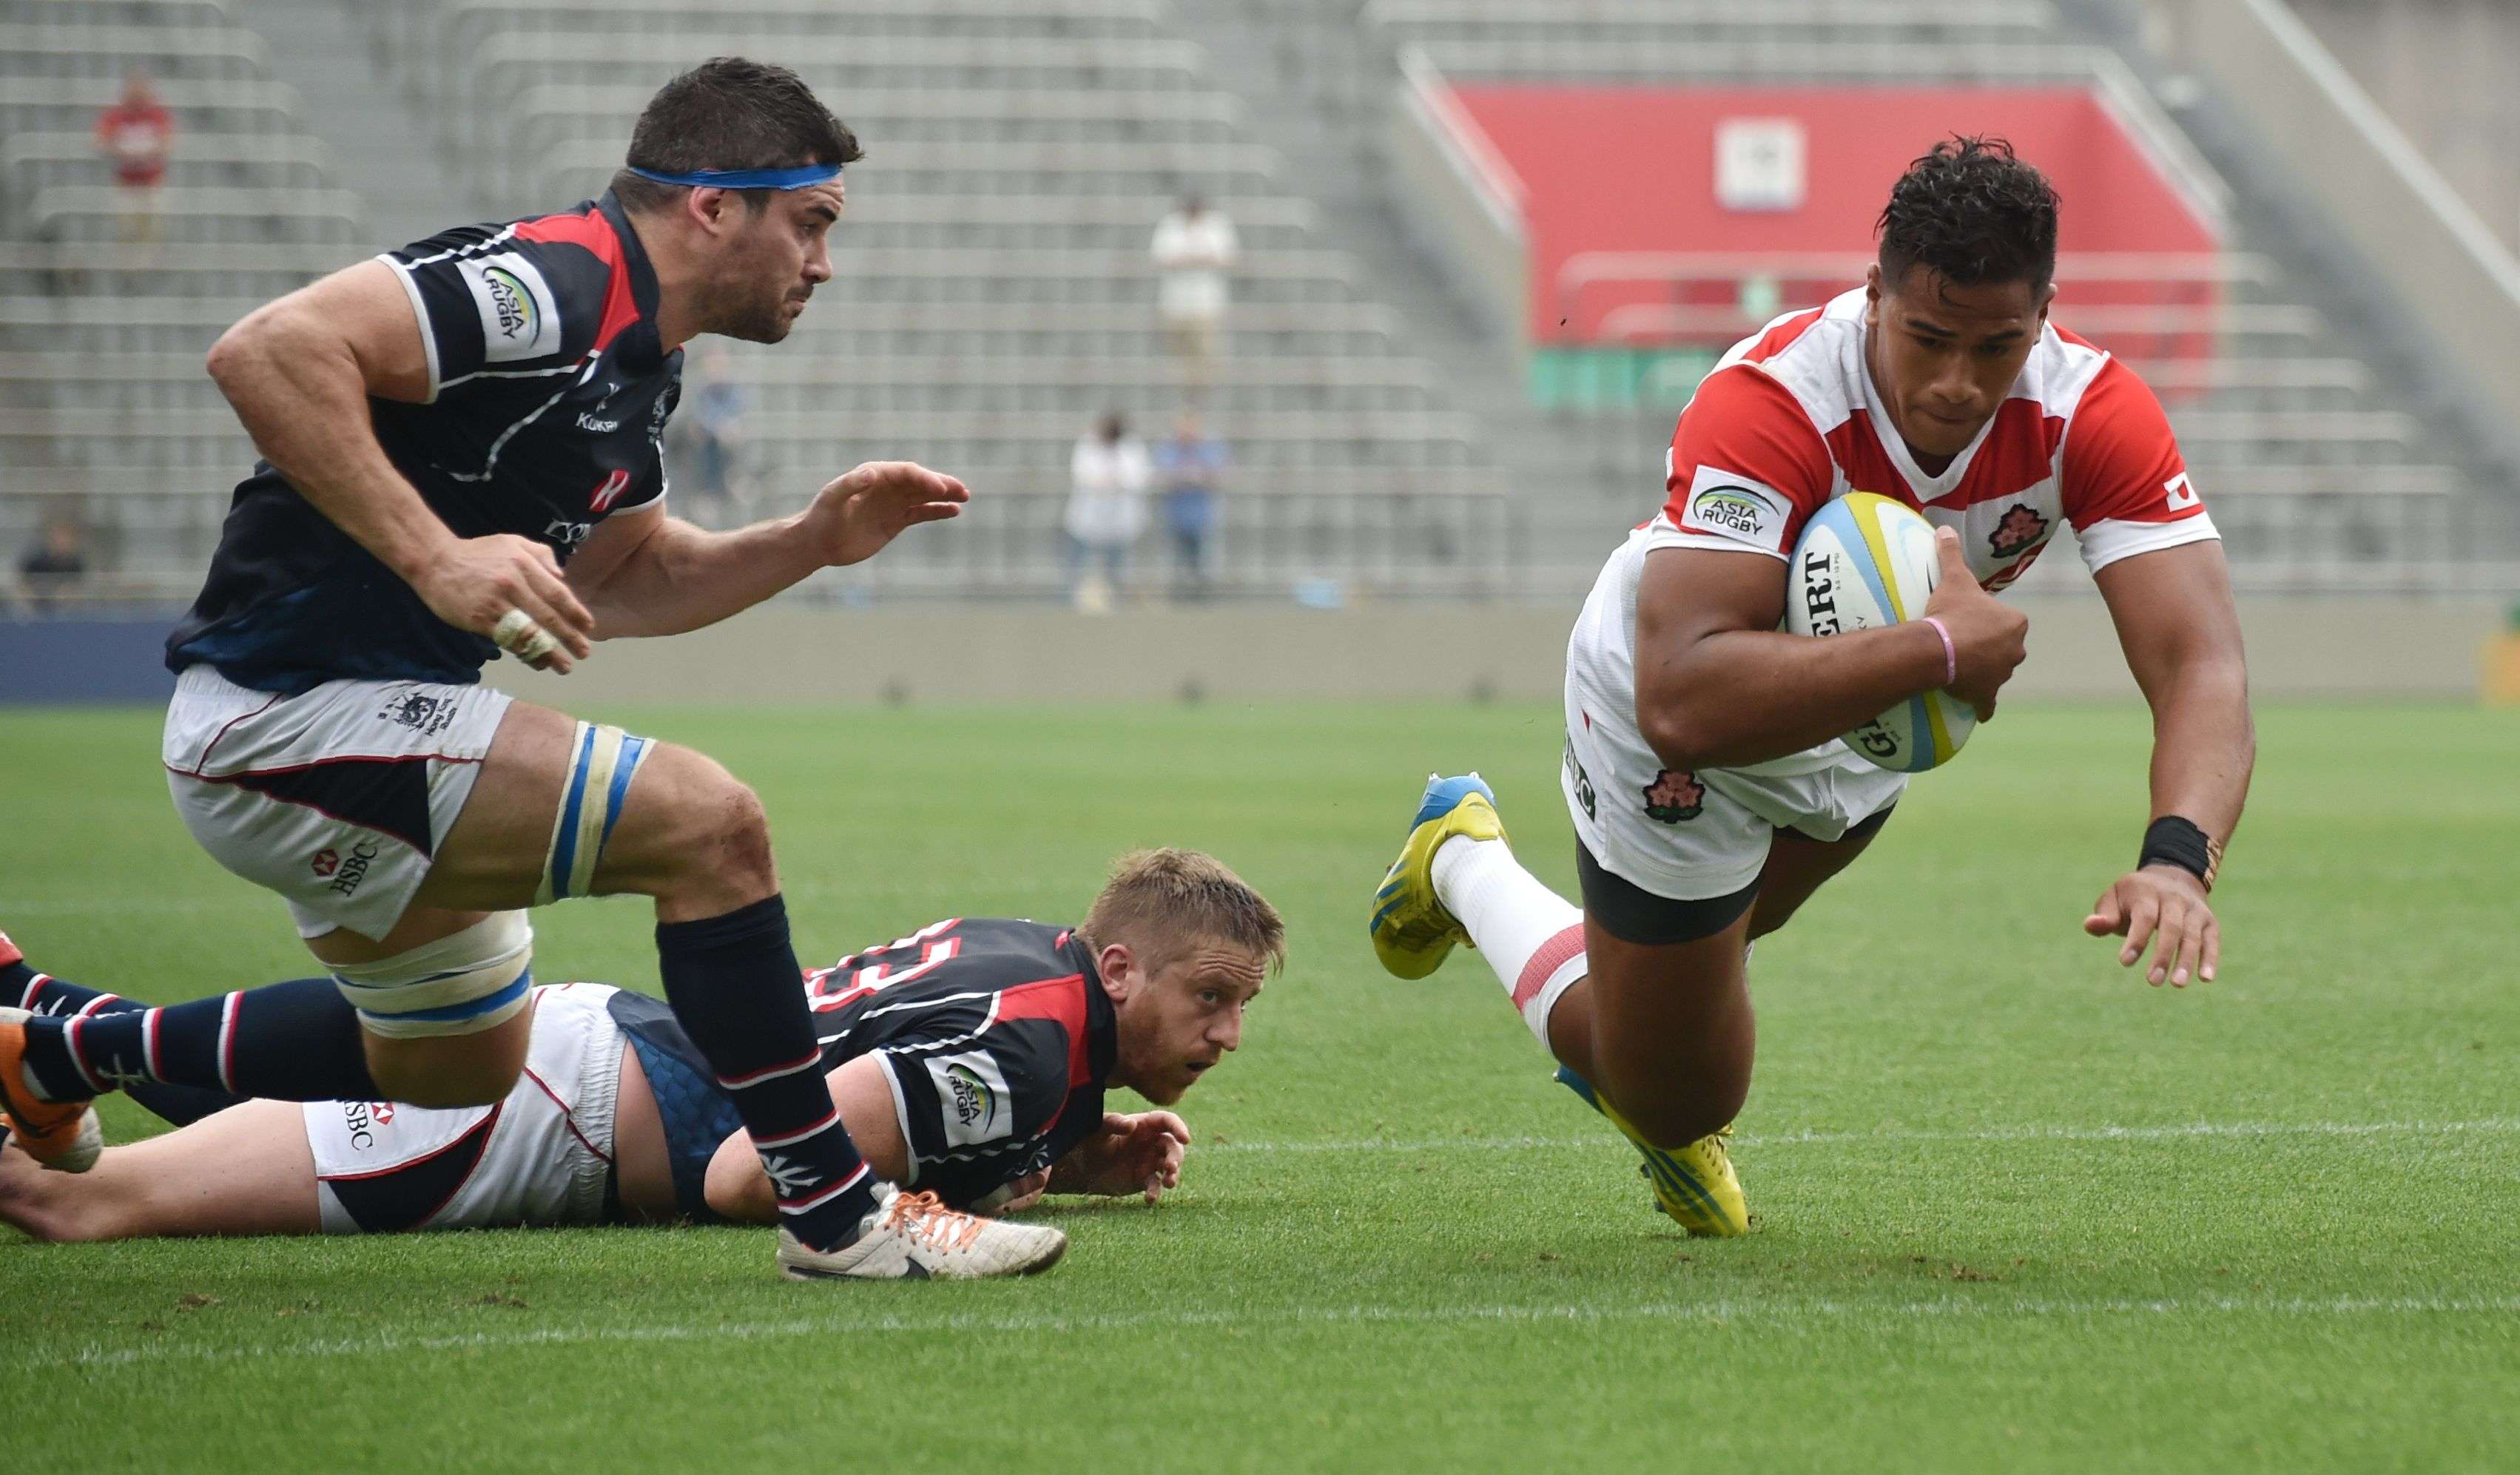 Hong Kong flanker Matthew Lamming can’t prevent Japan winger Ataata Moeakiola diving in for a try in their Asia Rugby Championship match in Tokyo. Photos: AFP